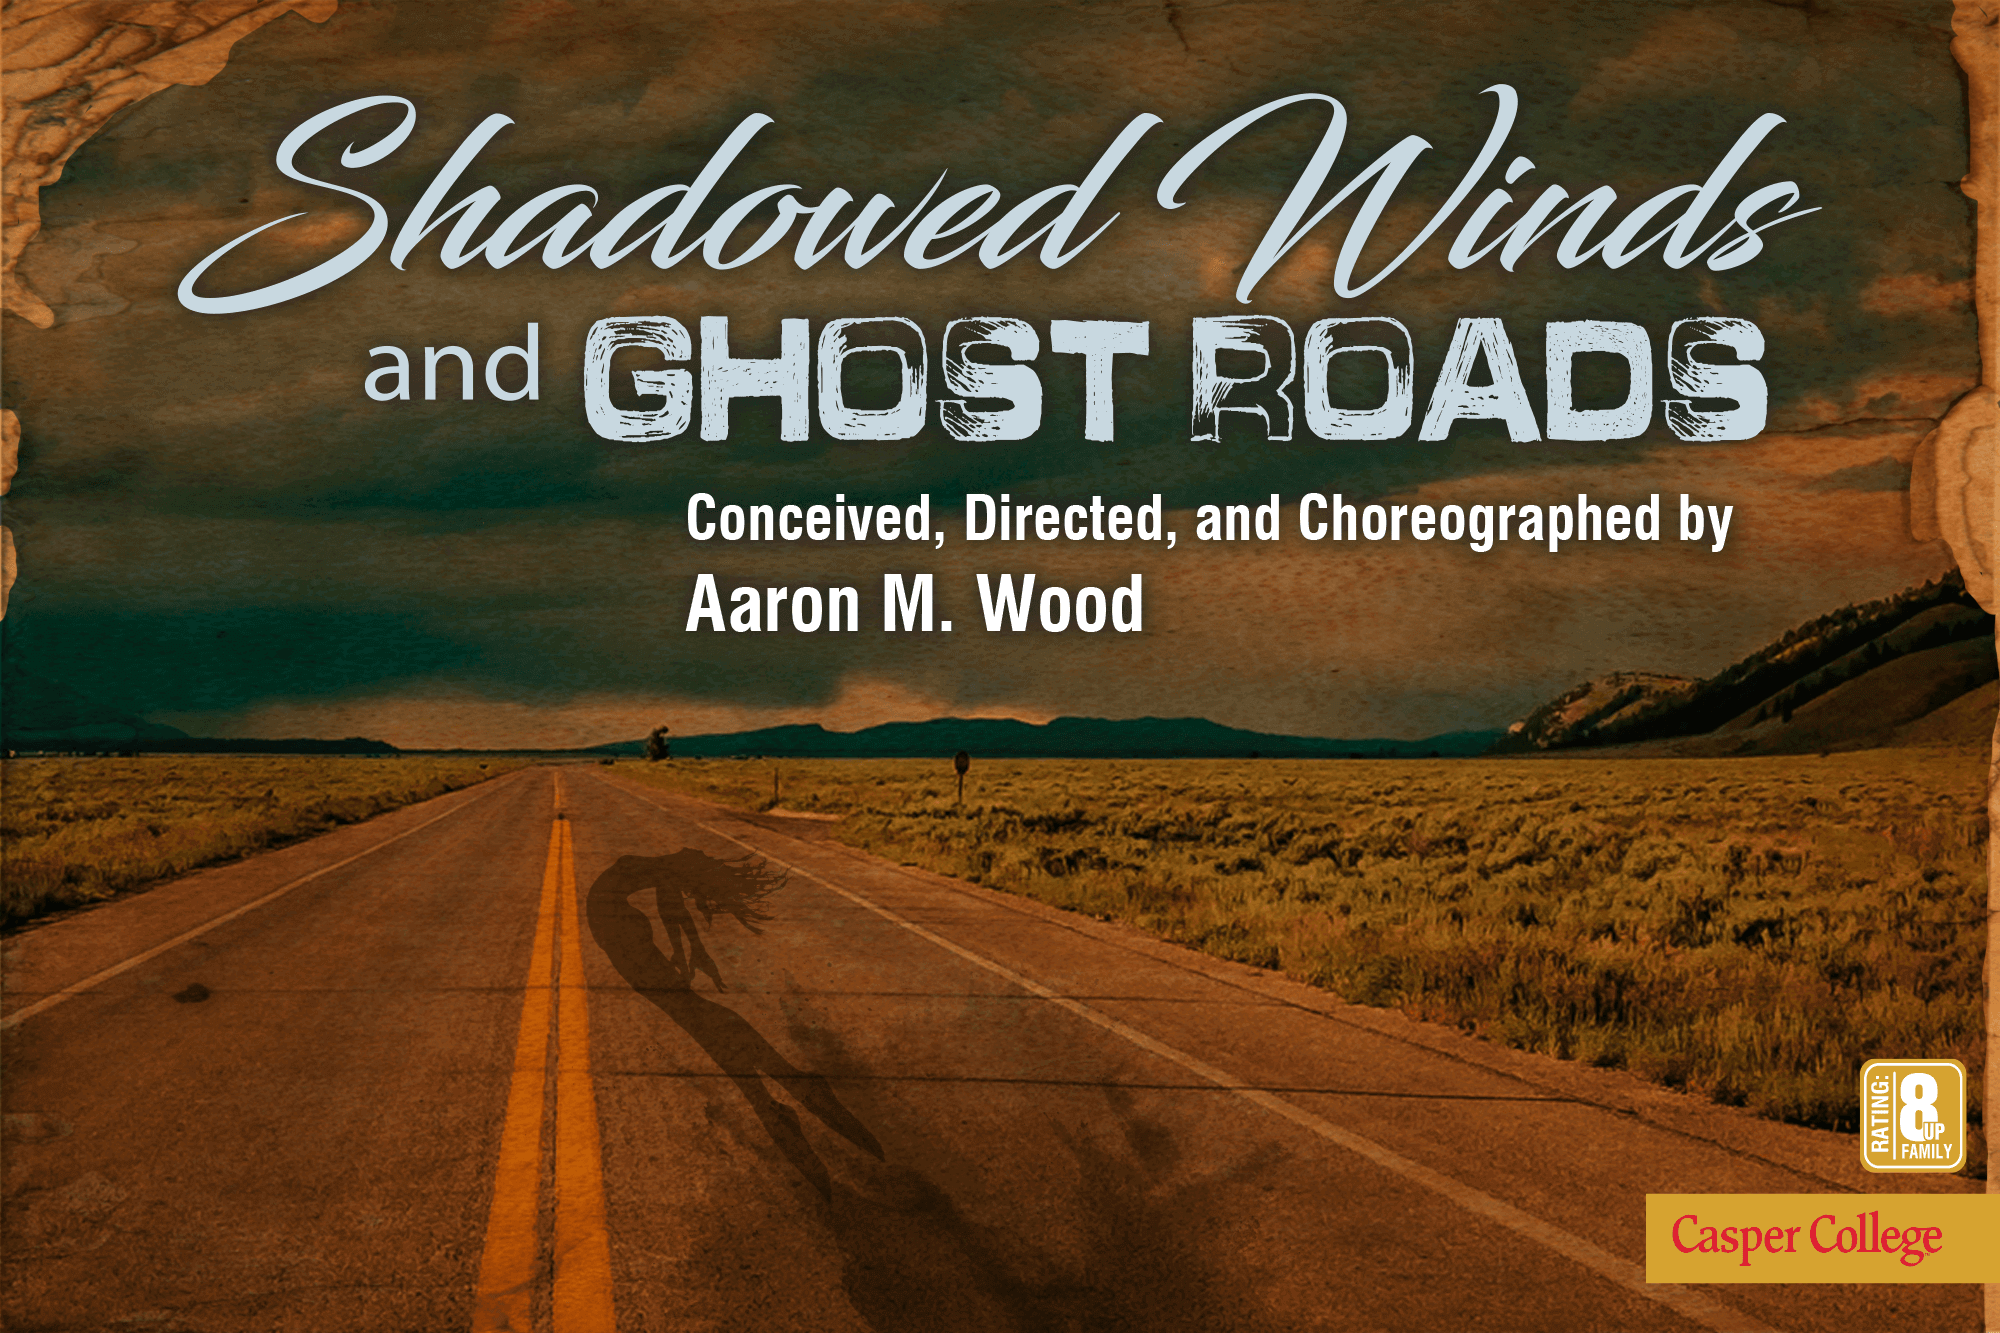 Image for "Shadowed Winds and Ghost Roads."